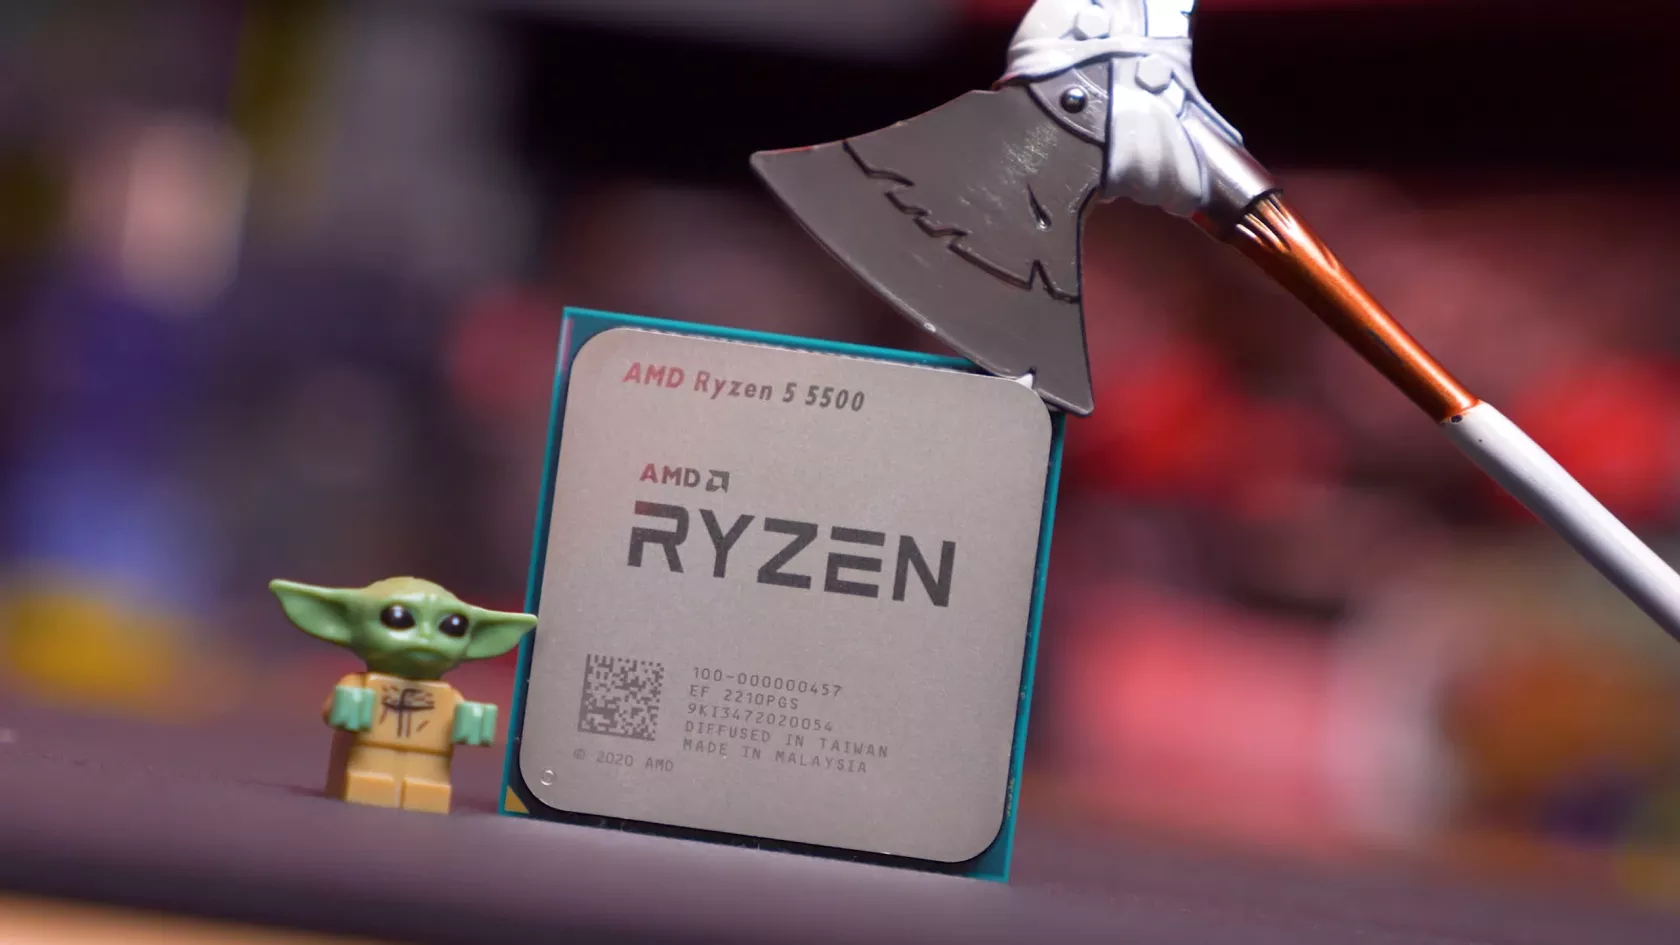 AMD Ryzen 5 5500 Review: Yea or Nay? | TechSpot Forums